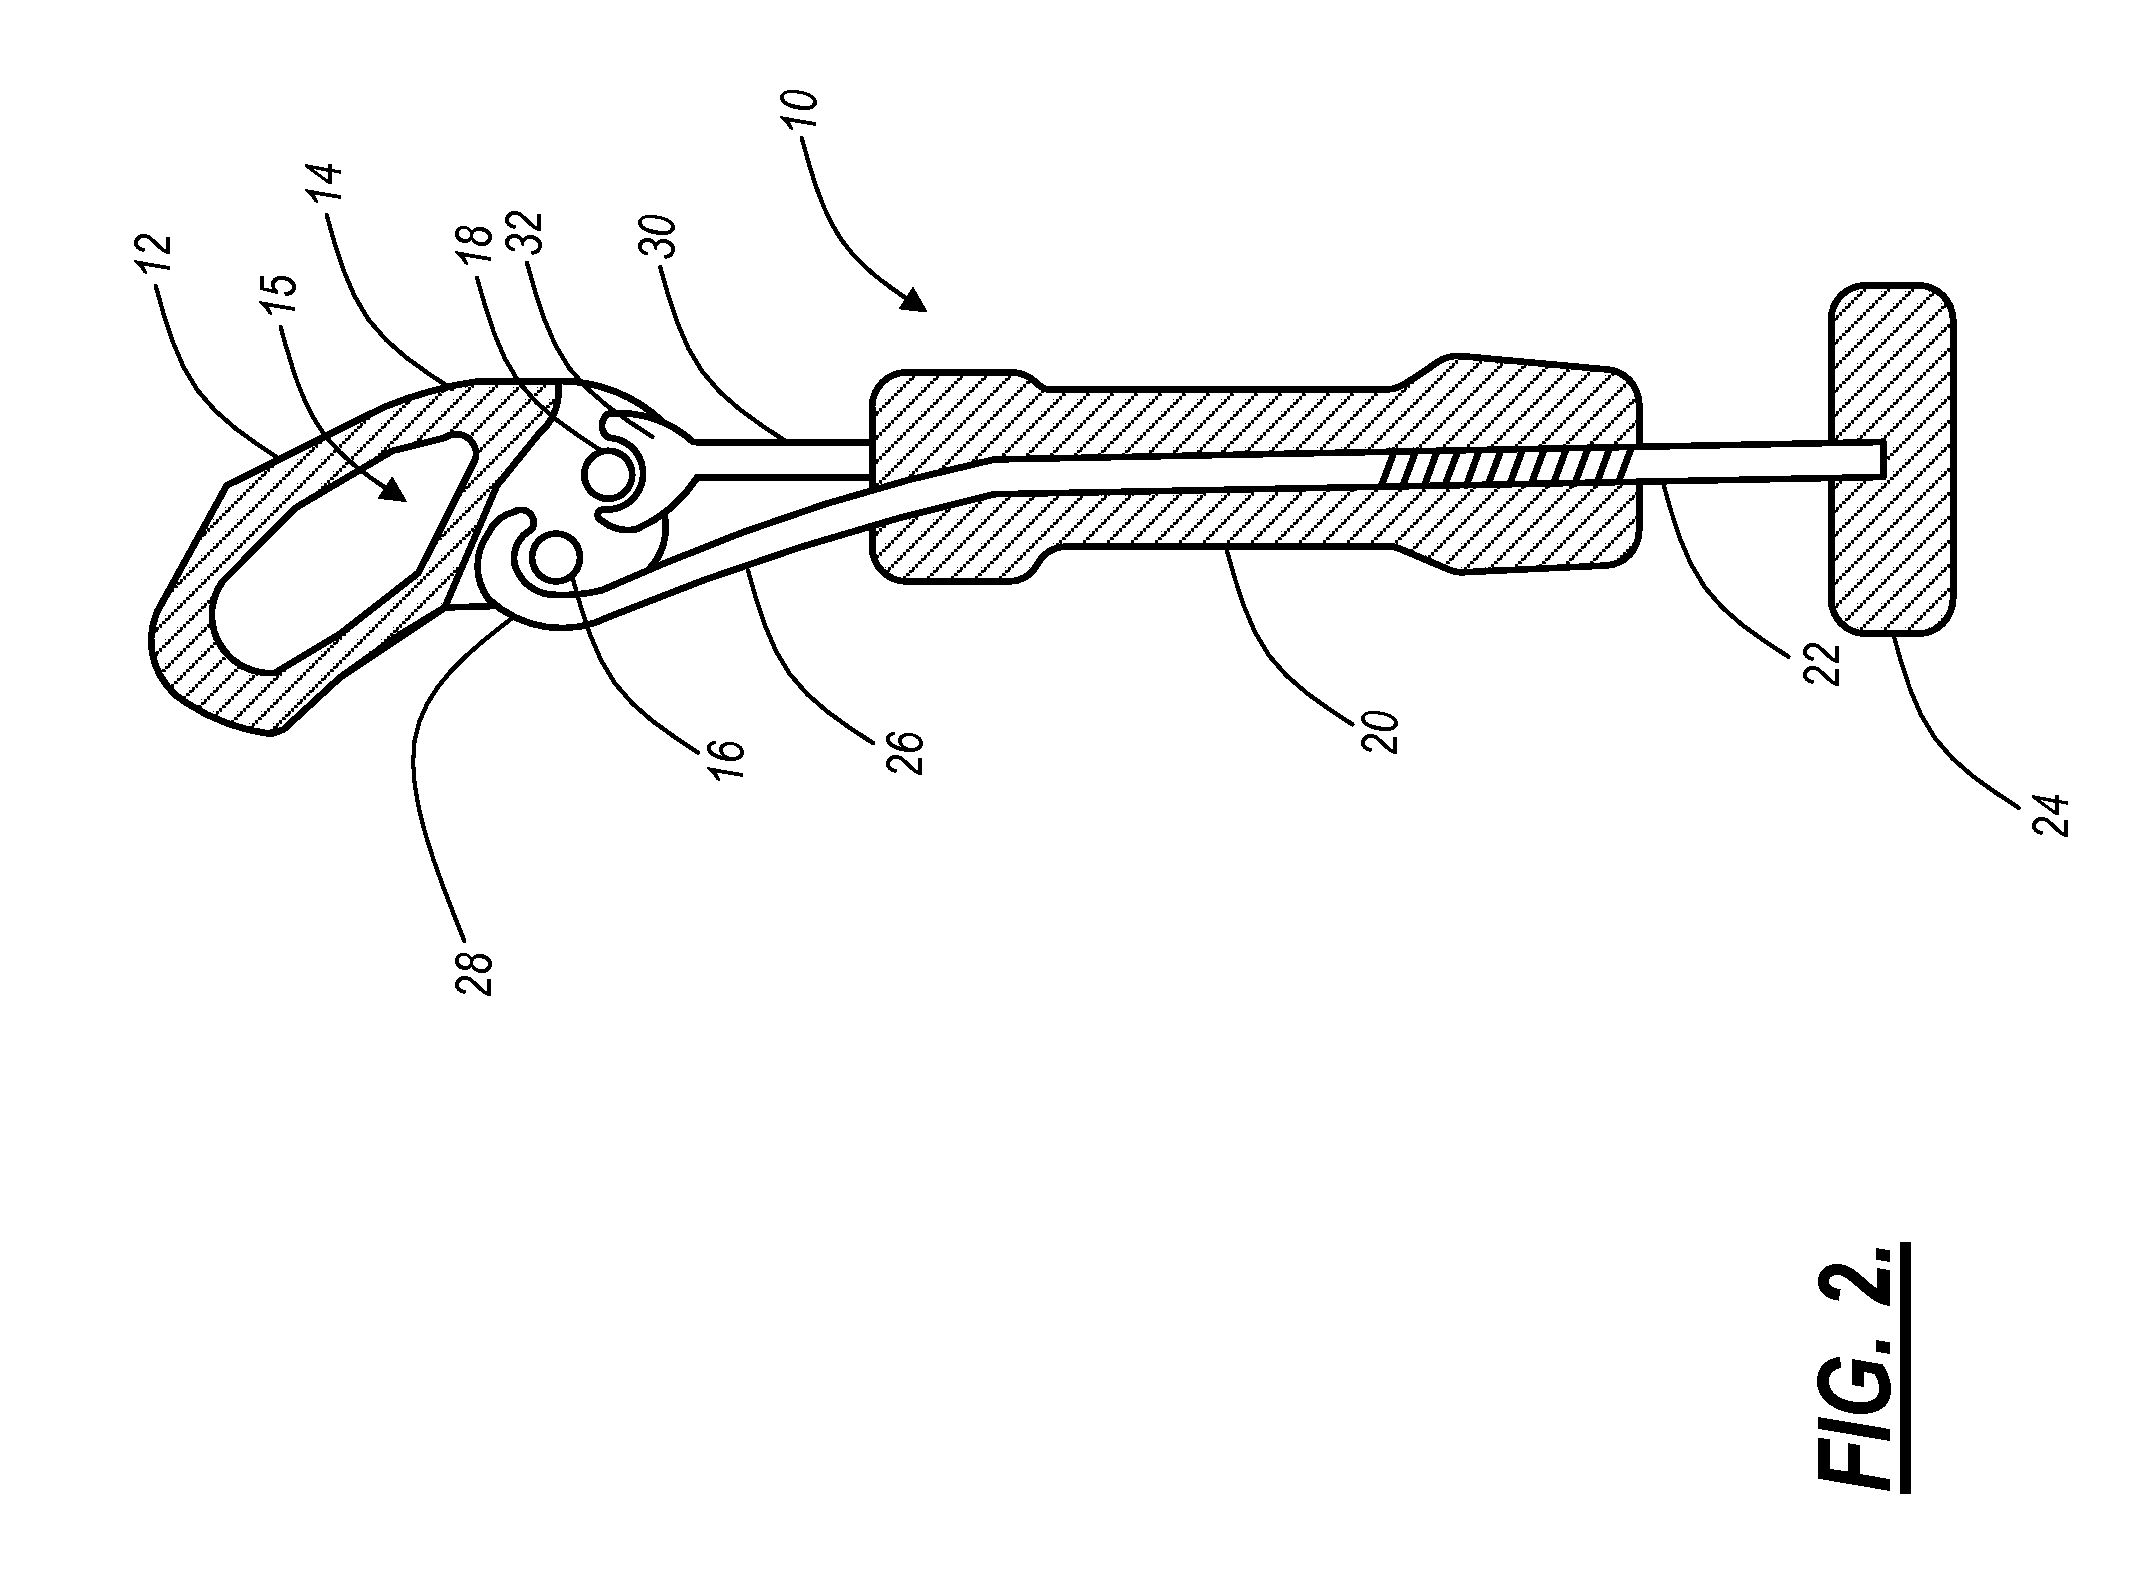 Surgical positioning assembly and associated spinal implant device and surgical methods